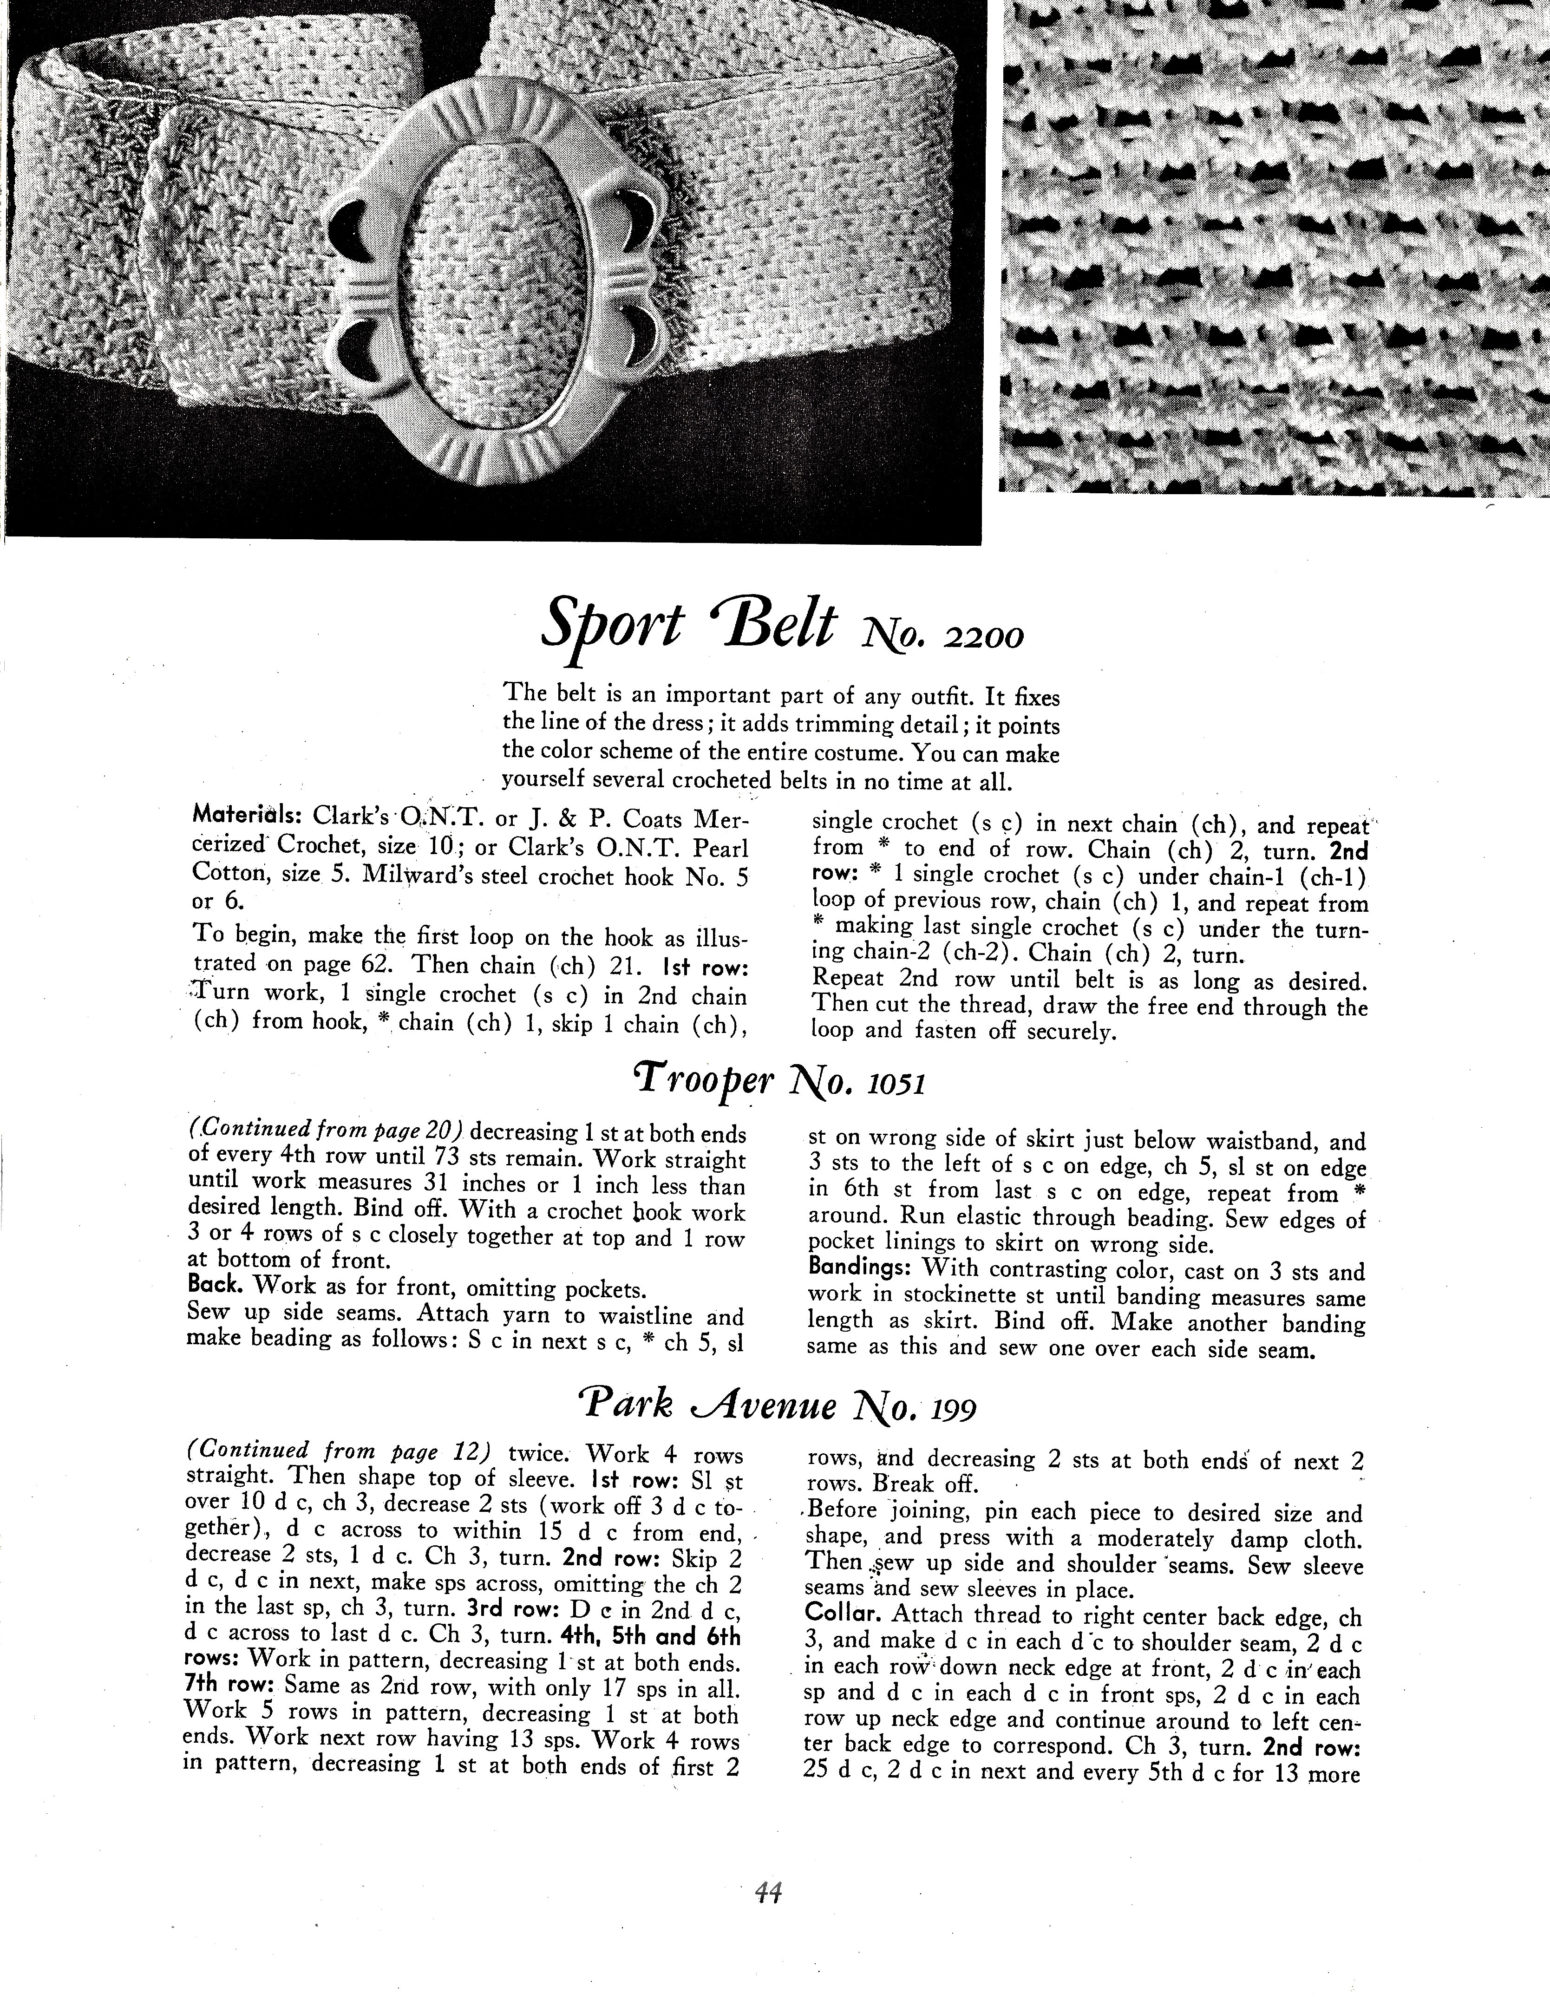 Sports Belt, the important part of any wardrobe. It fixes the line of the dress and it adds trimming detail. It points the color scheme of the entire costume. You can make yourself several crocheted belts in no time at all.